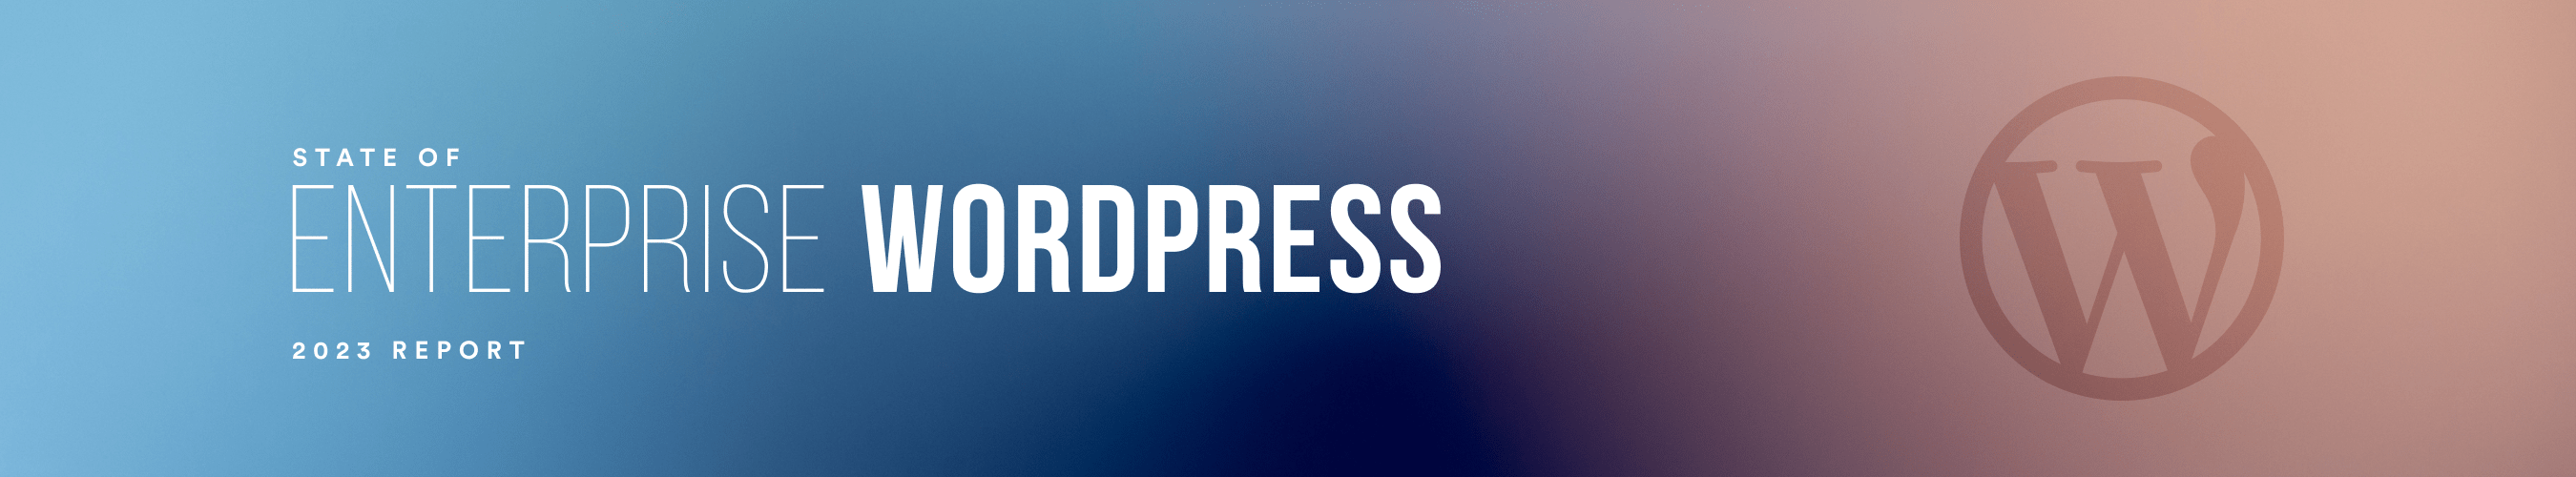 View the 2023 State of Enterprise WordPress survey results